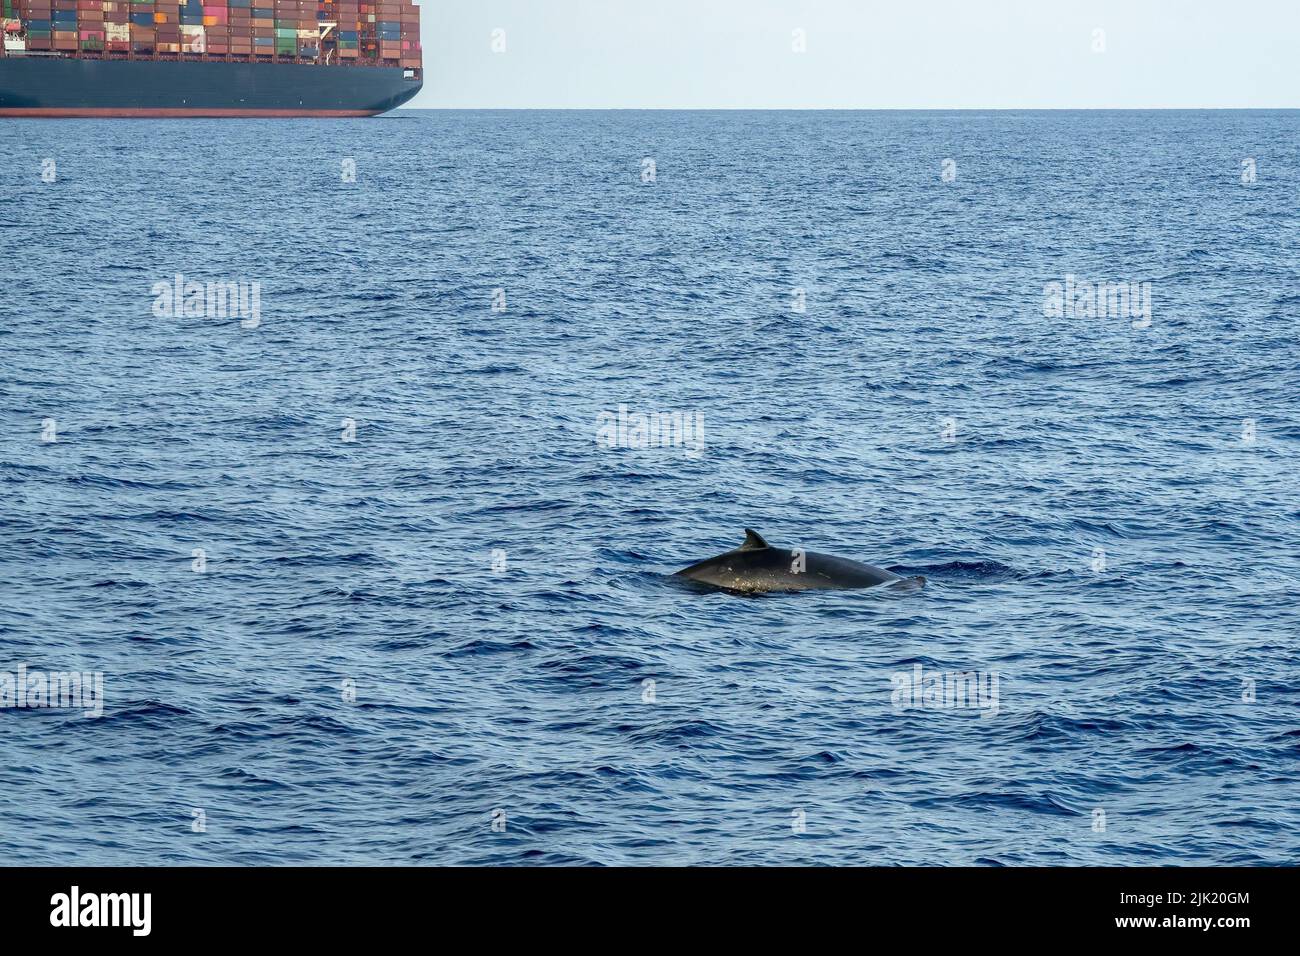 Cuvier beaked whale on sea surface near container ship Stock Photo